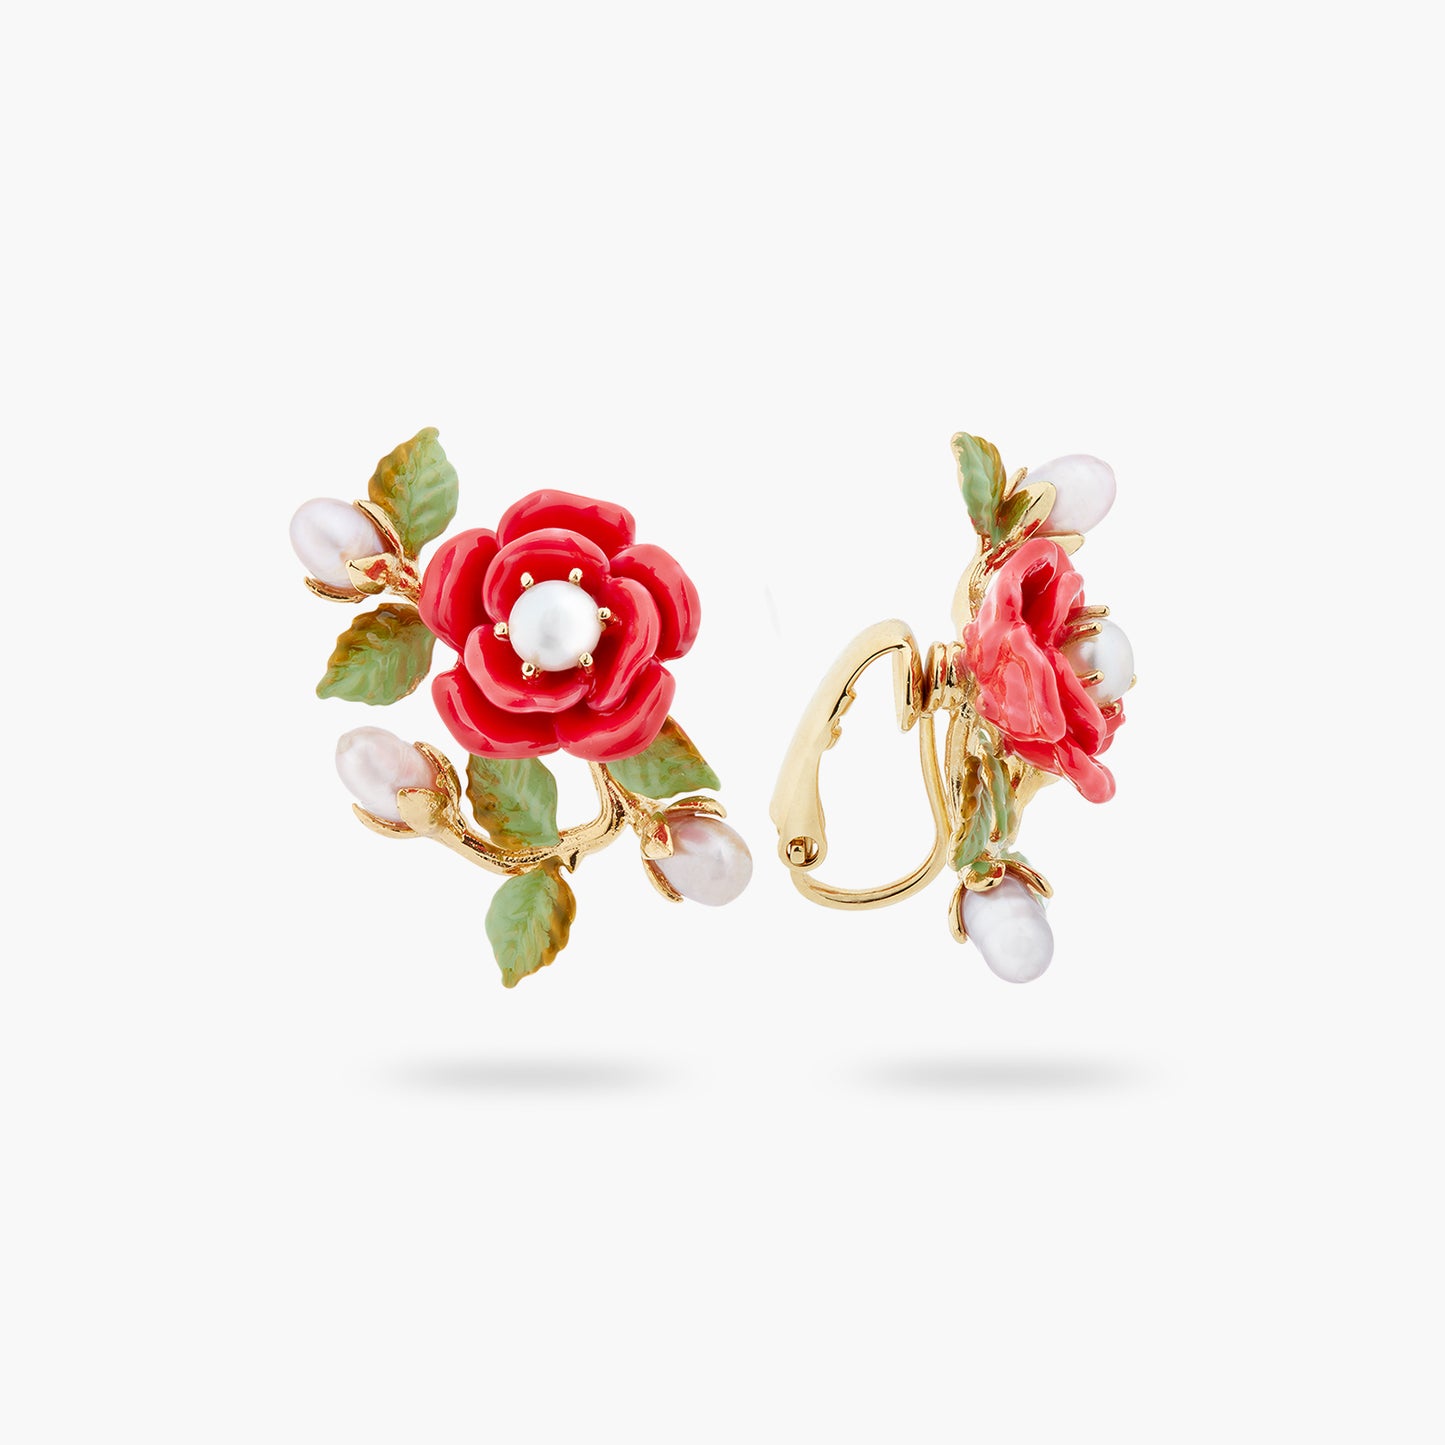 Rose branch and cultured pearl earrings | ASAR1081